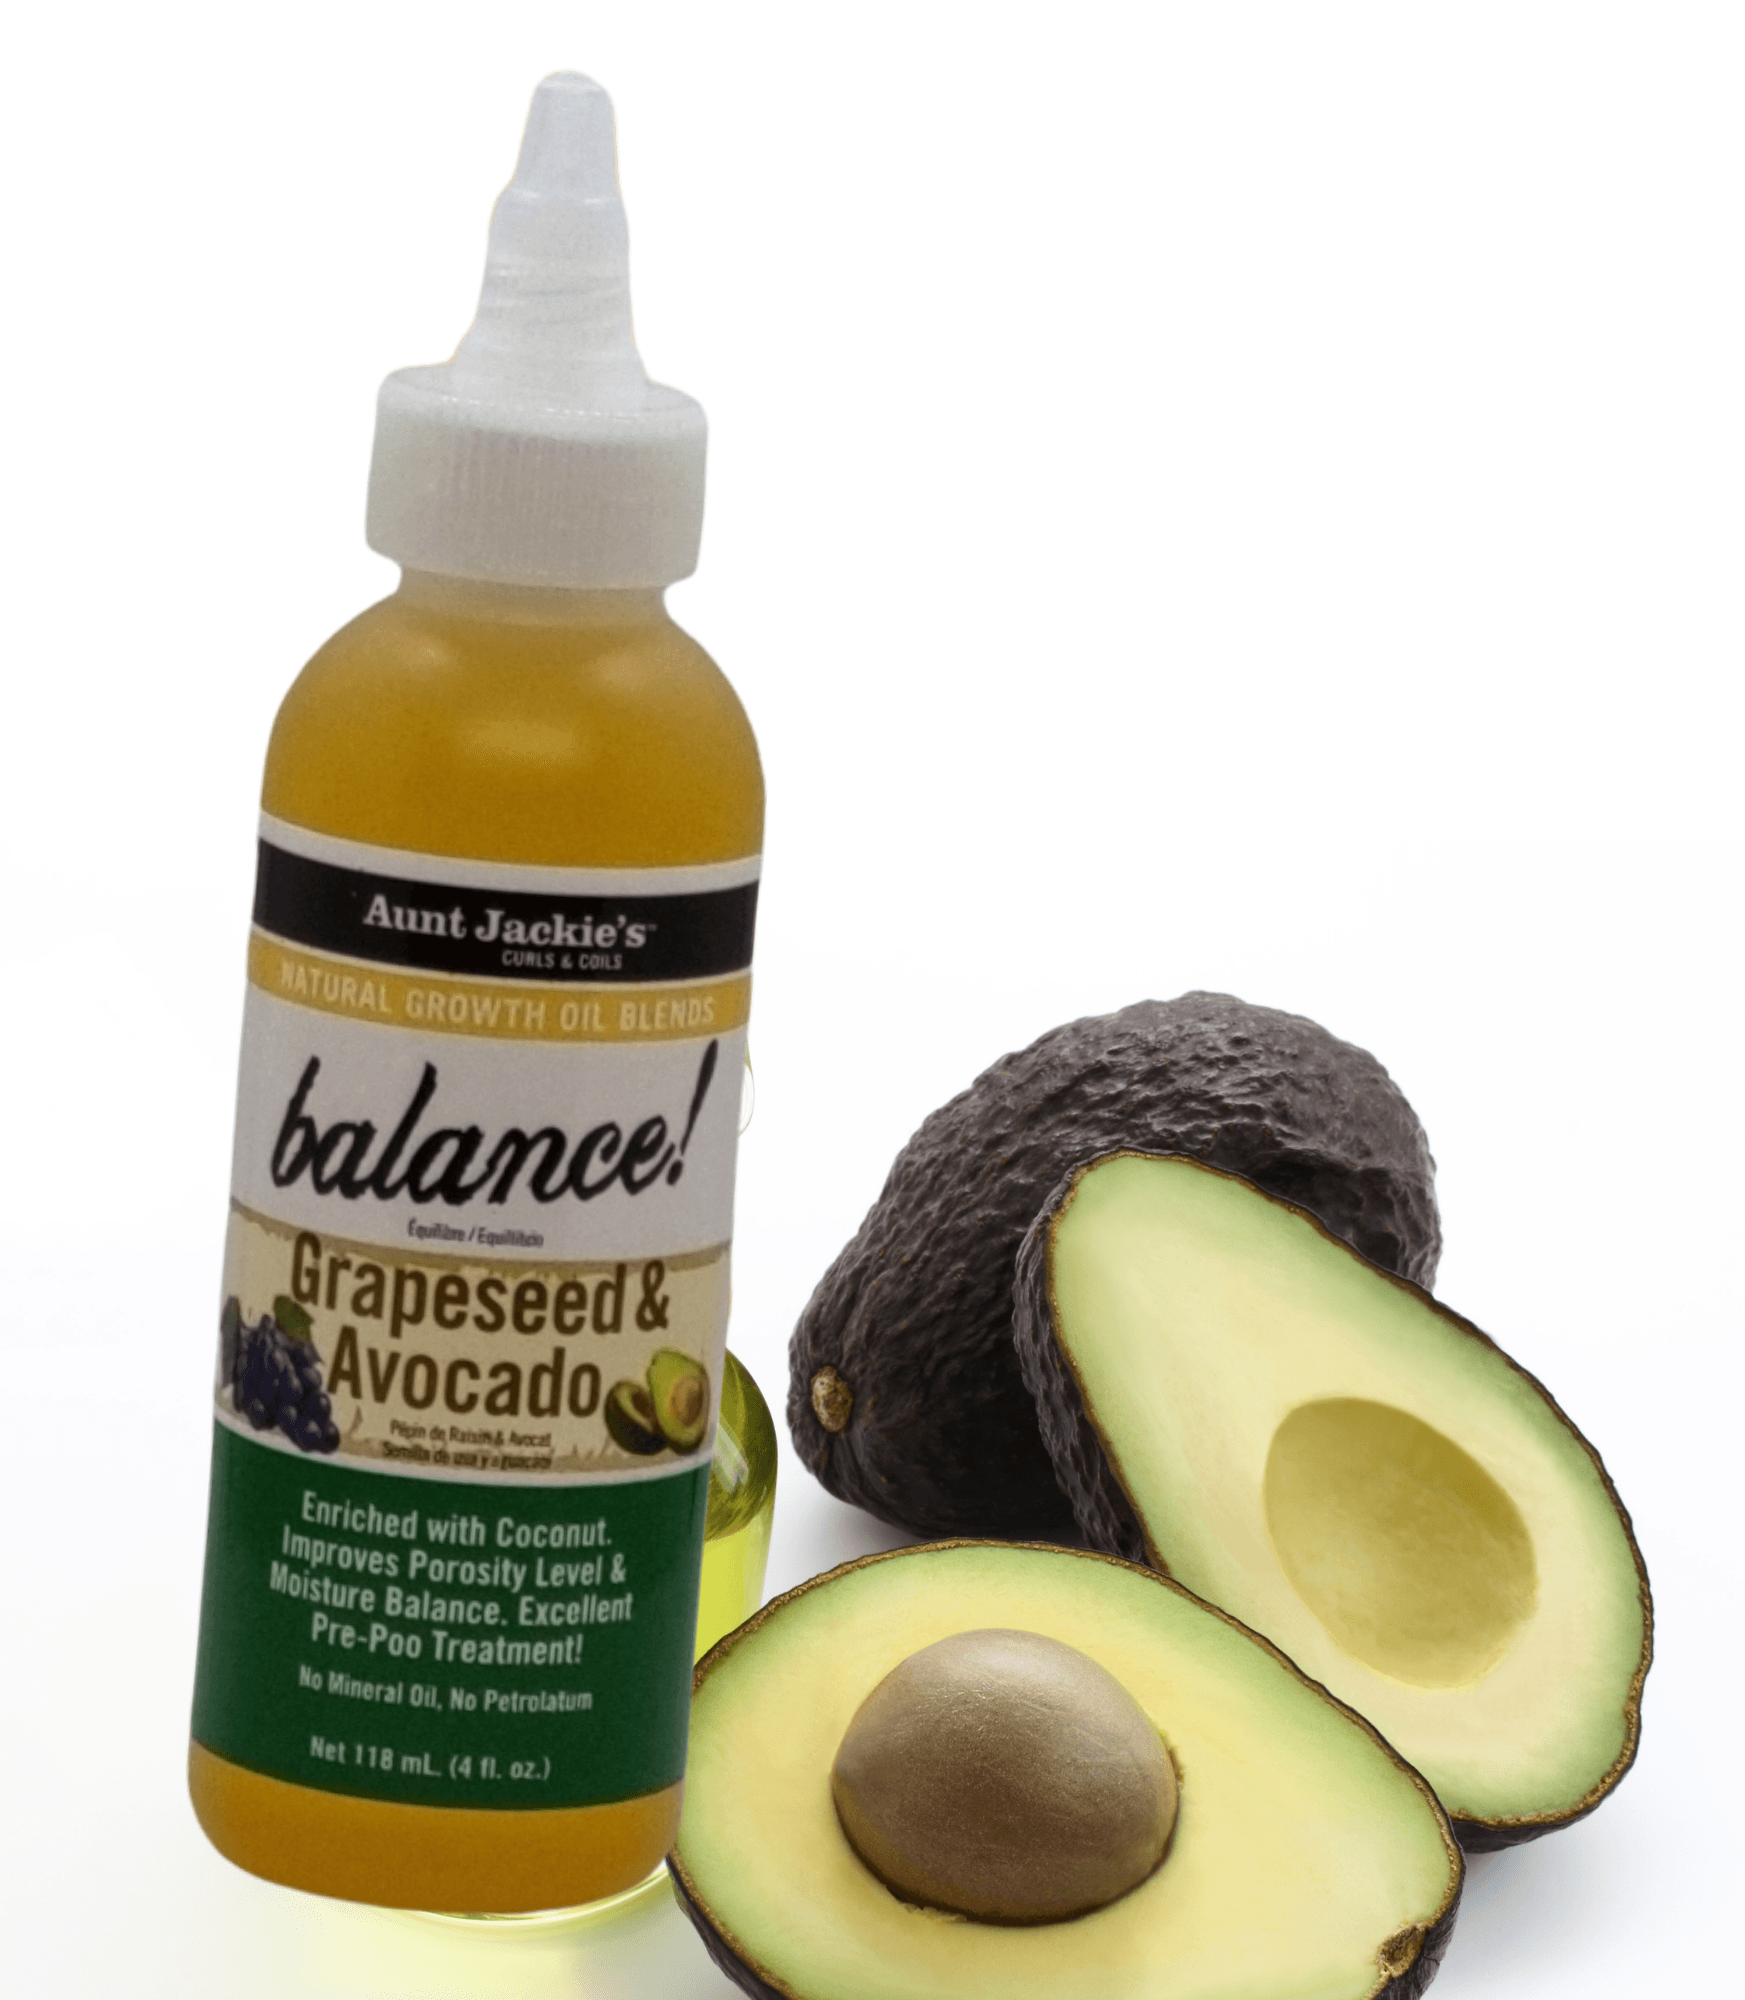 Aunt Jackie's Grapeseed & Avocado Growth Oil - LocsNco